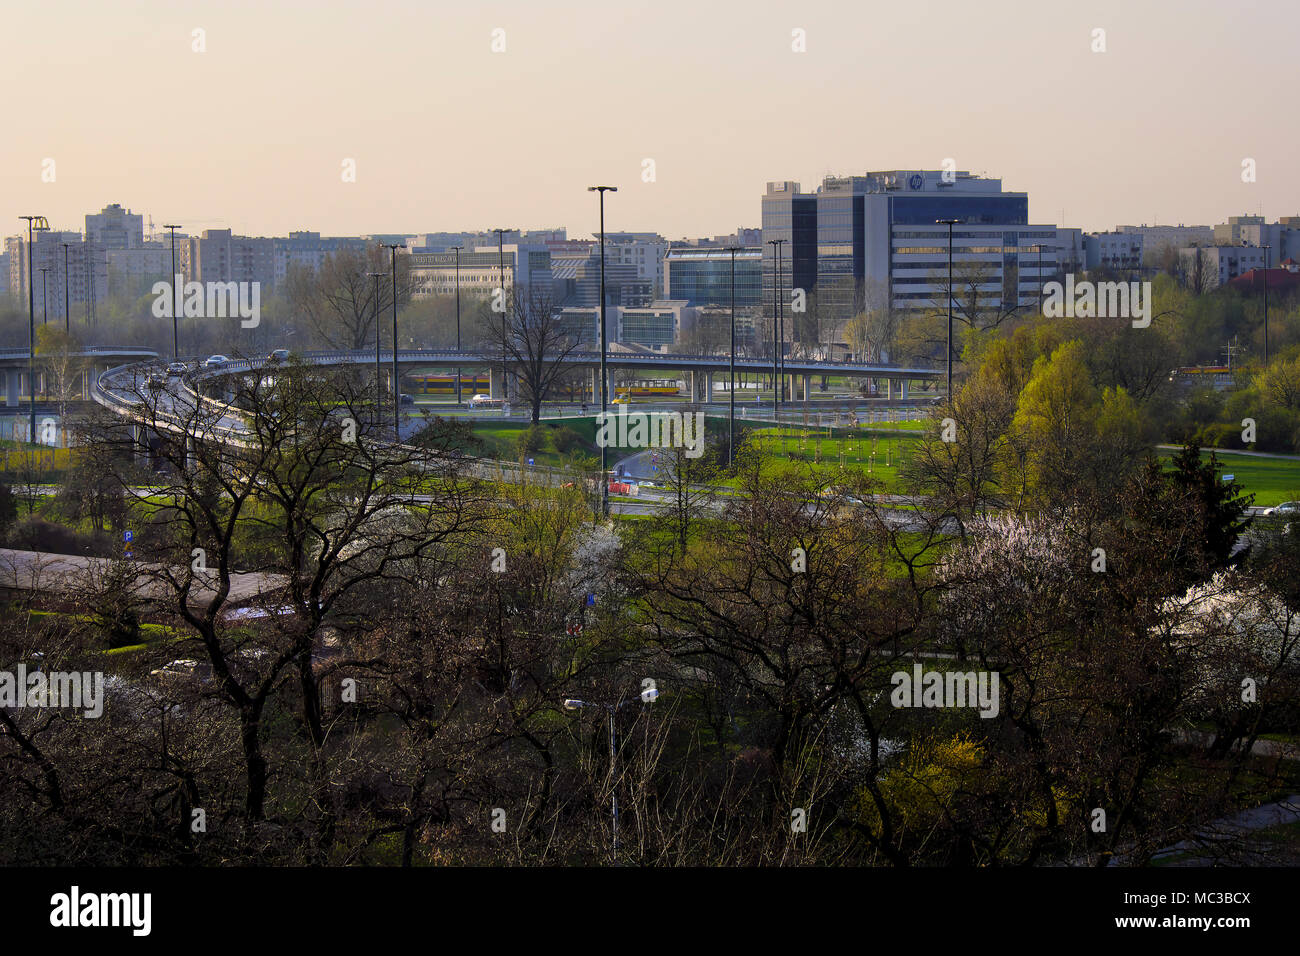 Warsaw, Mazovia / Poland - 2018/04/12: Panoramic view of New Mokotow quarter - residential and business district in southern Warsaw, featuring multi-f Stock Photo